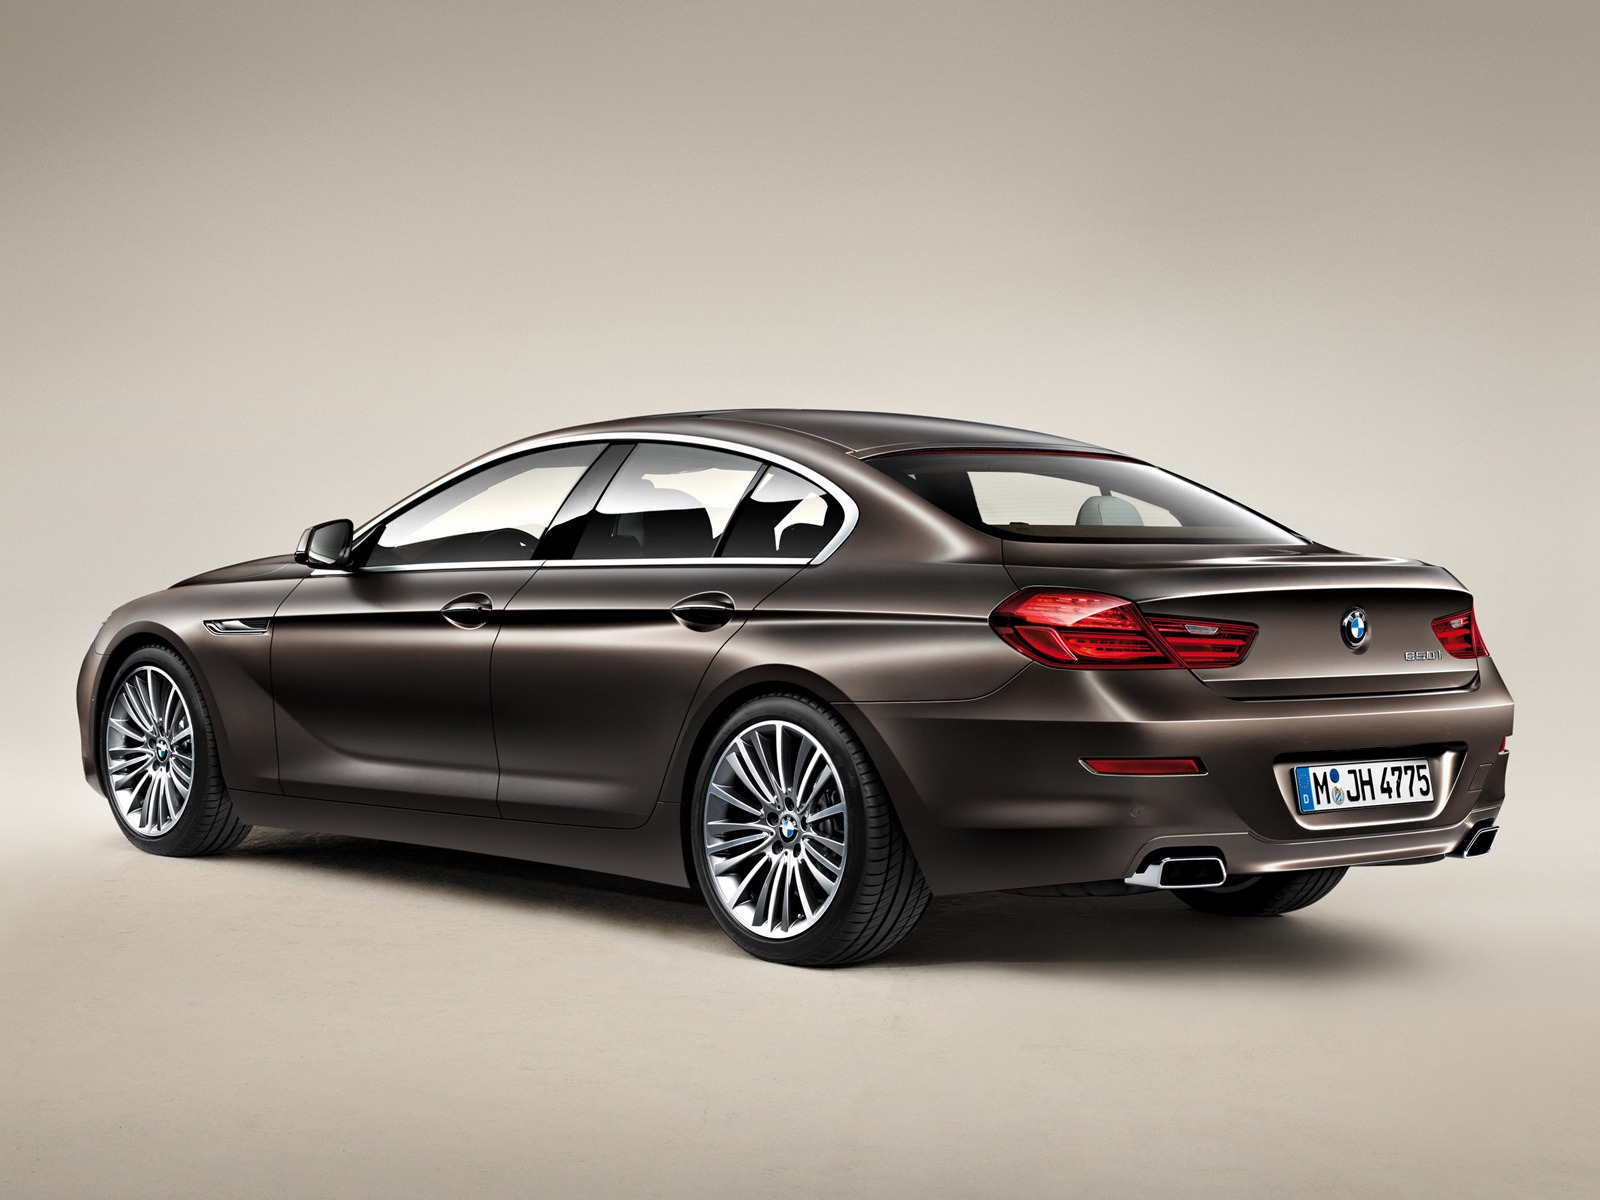 2013 BMW 6 Series Rear for 1600 x 1200 resolution